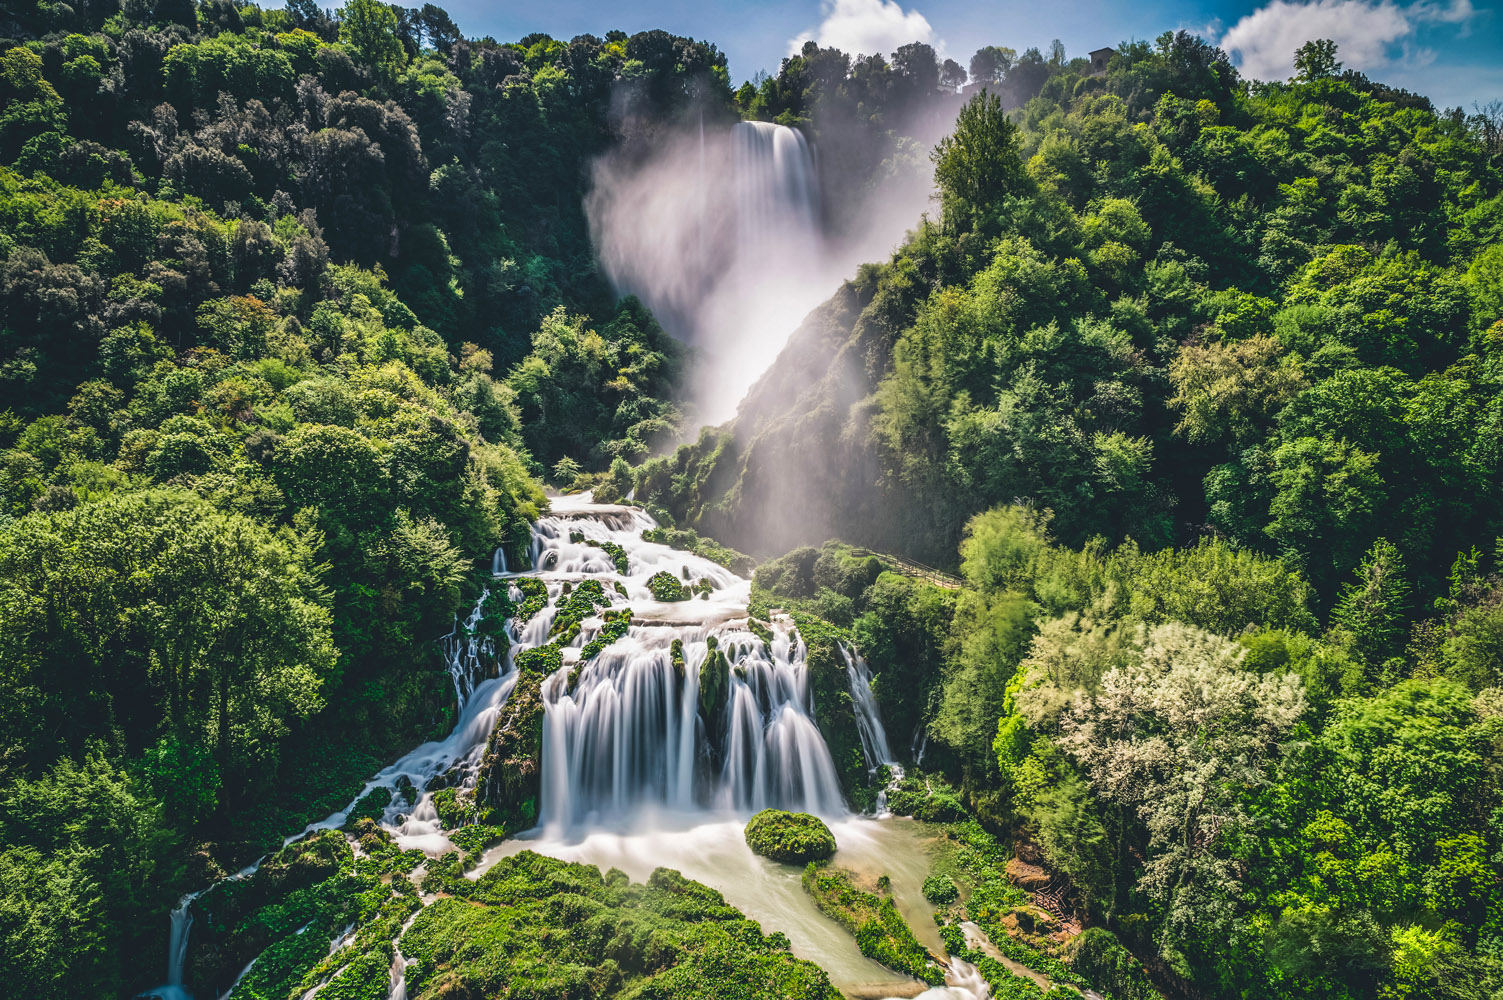 Cascata delle Marmore - Things to Do and See in Umbria